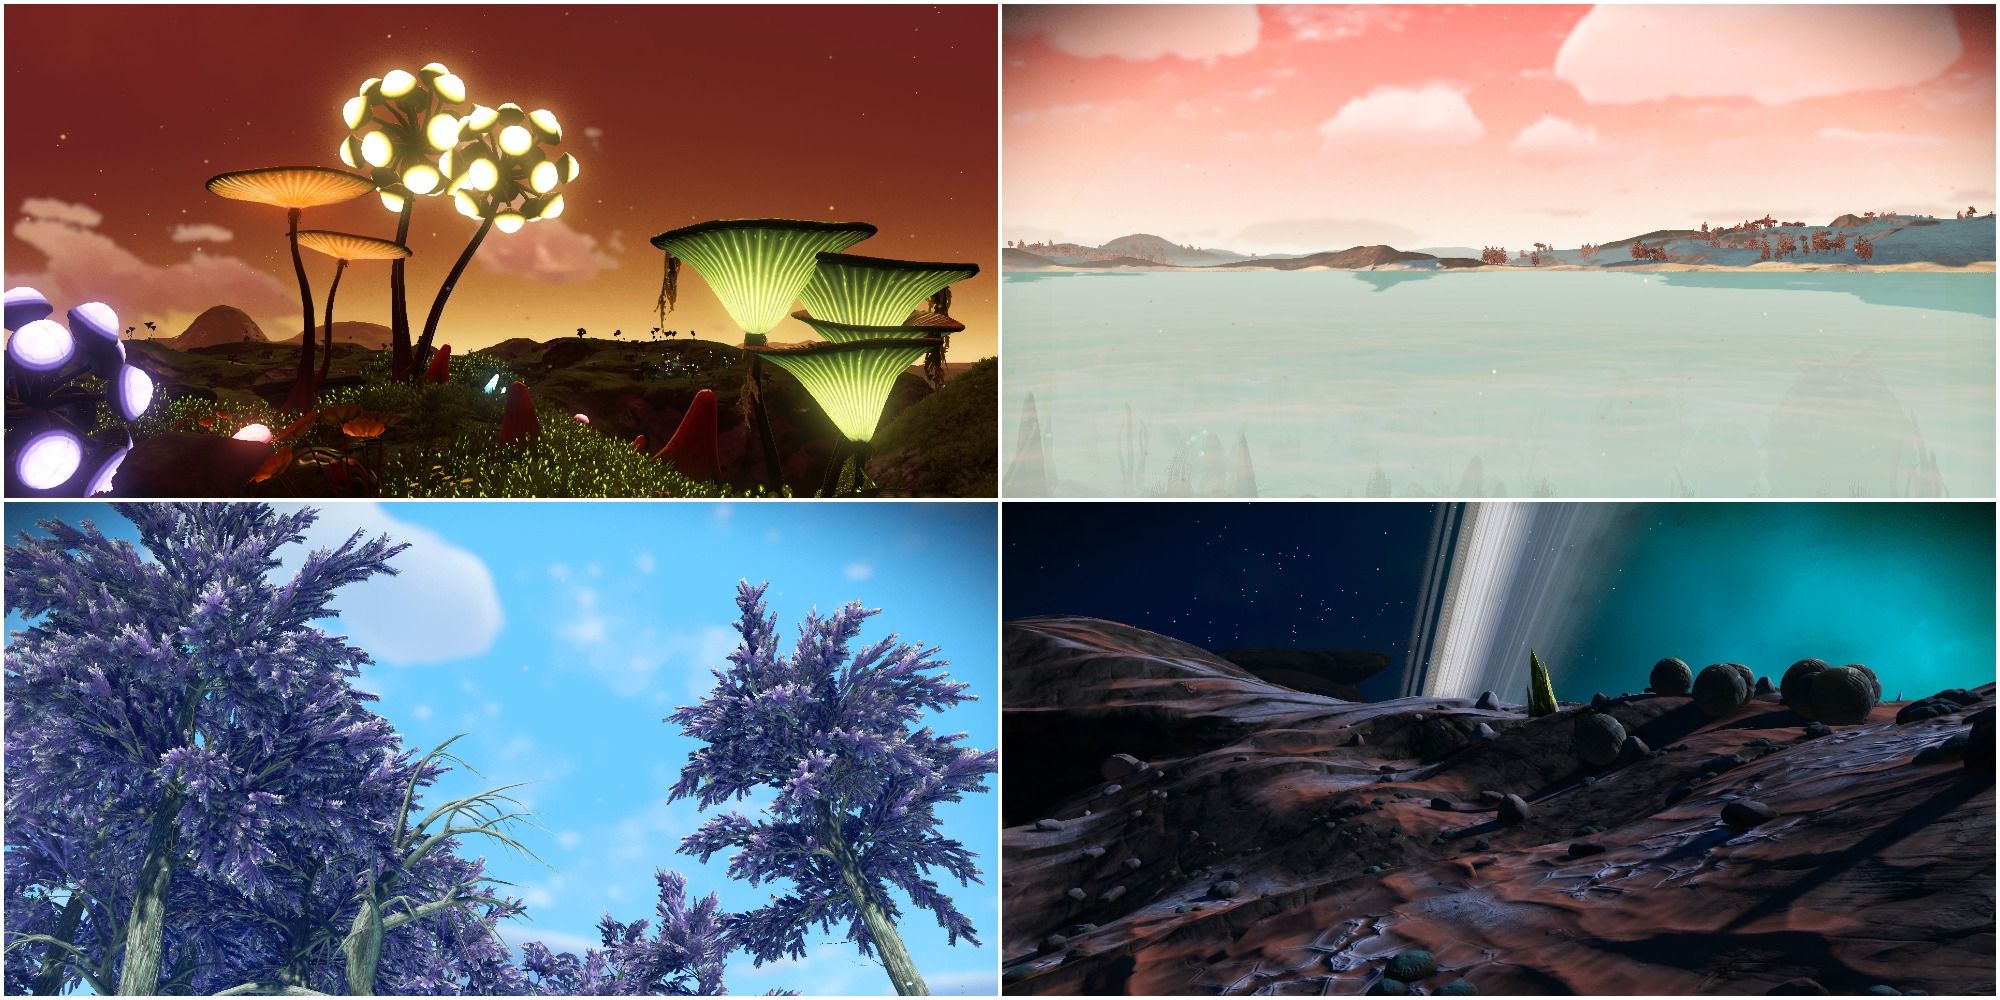 No Man's Sky: biomes have different colors with this mod